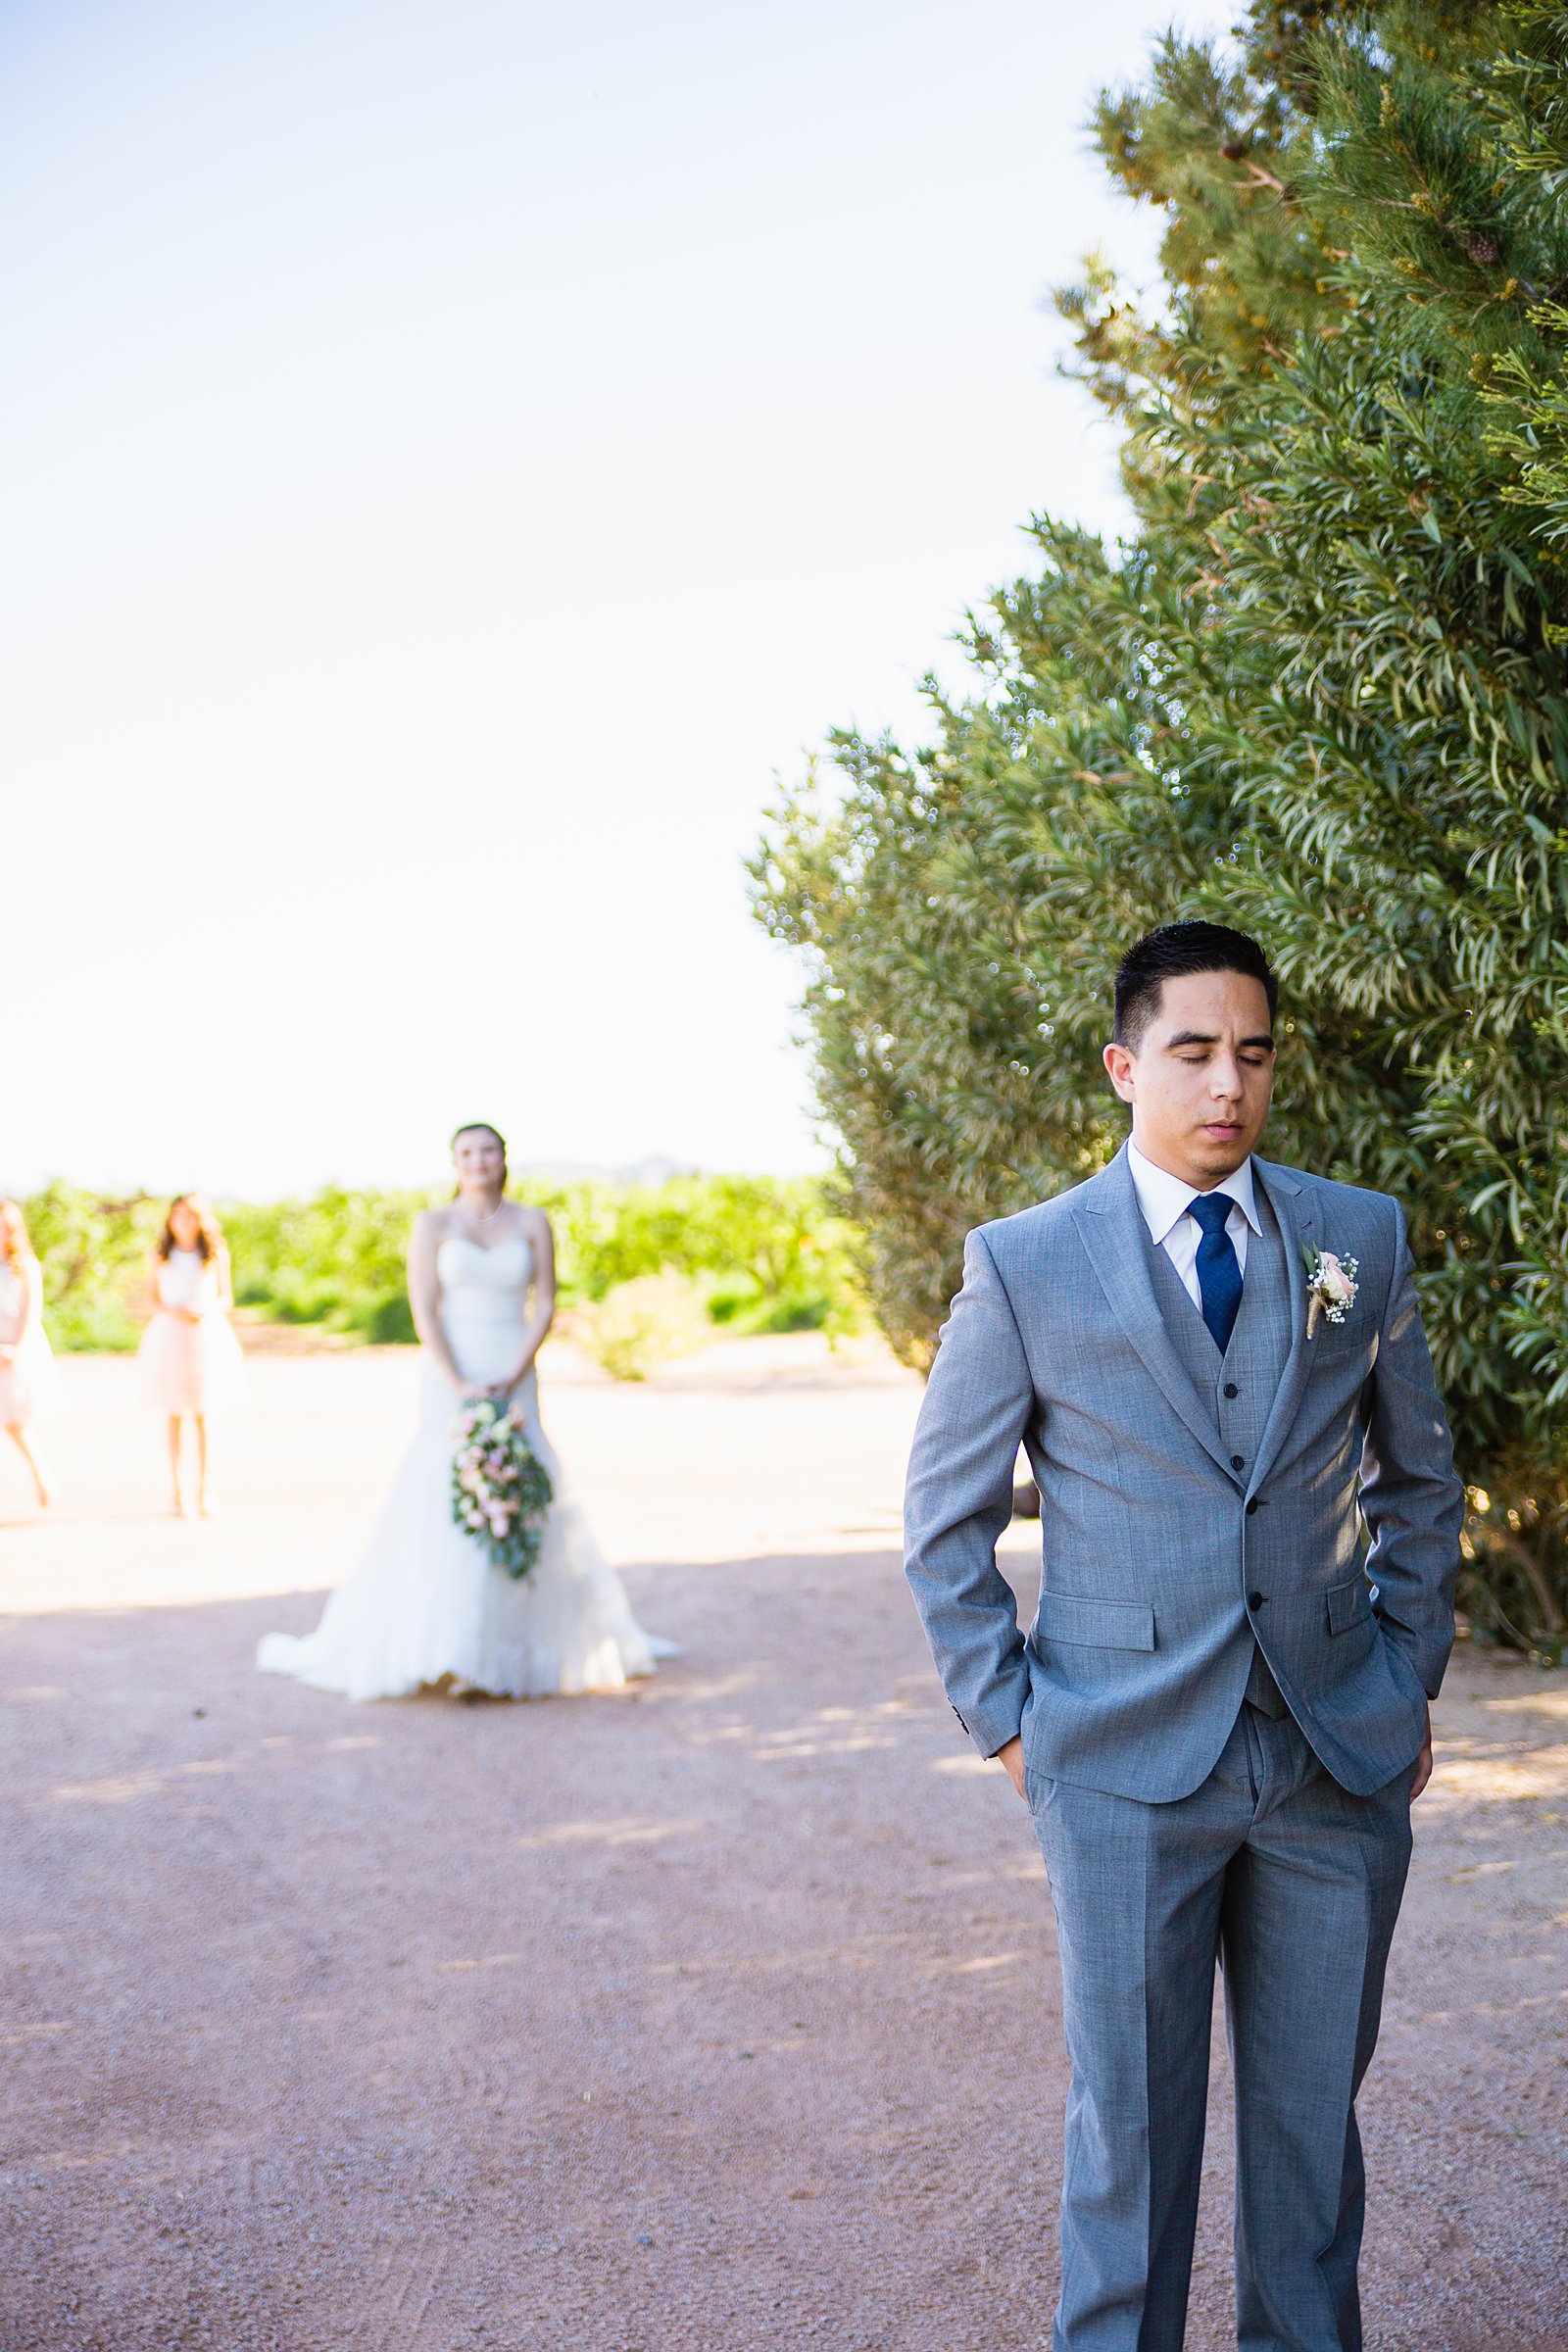 Bride and groom's first look at Schnepf Farms by Arizona wedding photographer PMA Photography.